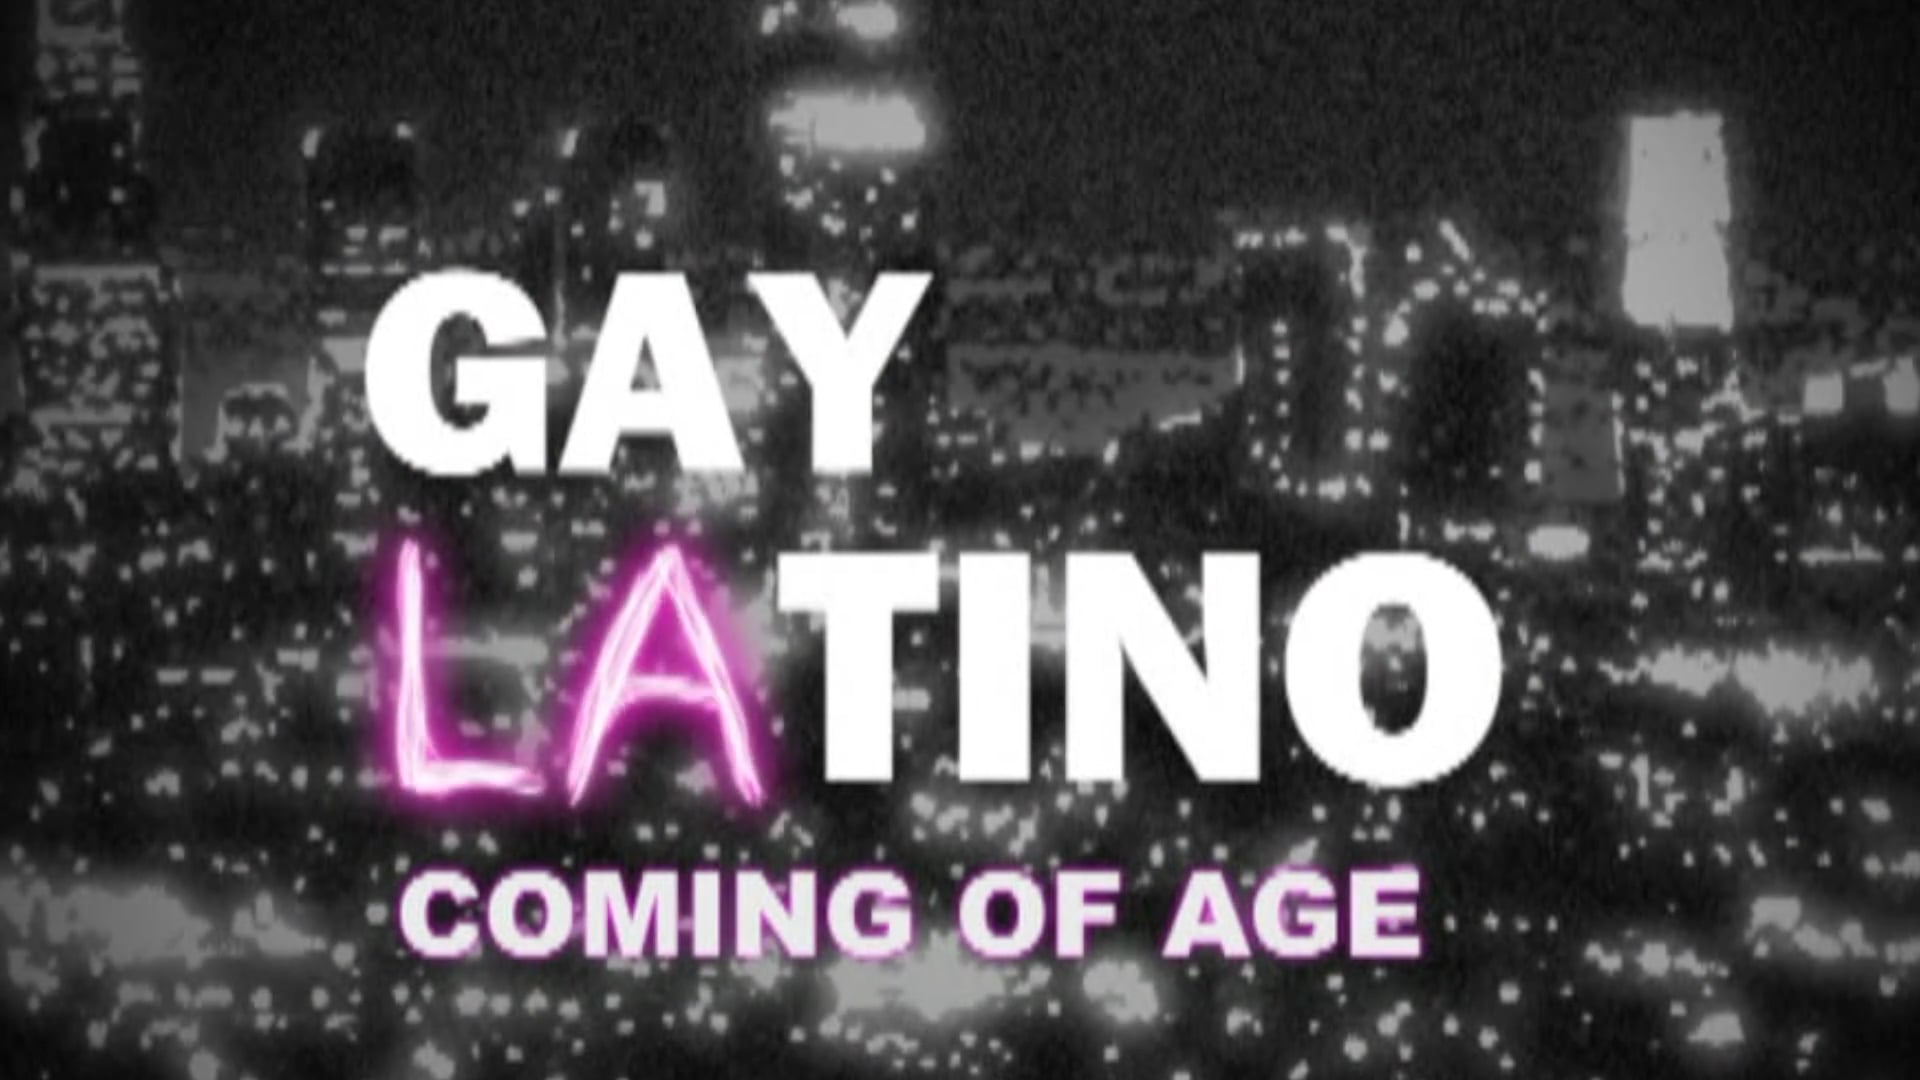 Watch Gay Latino Los Angeles Coming Of Age Sd Online Vimeo On Demand On Vimeo